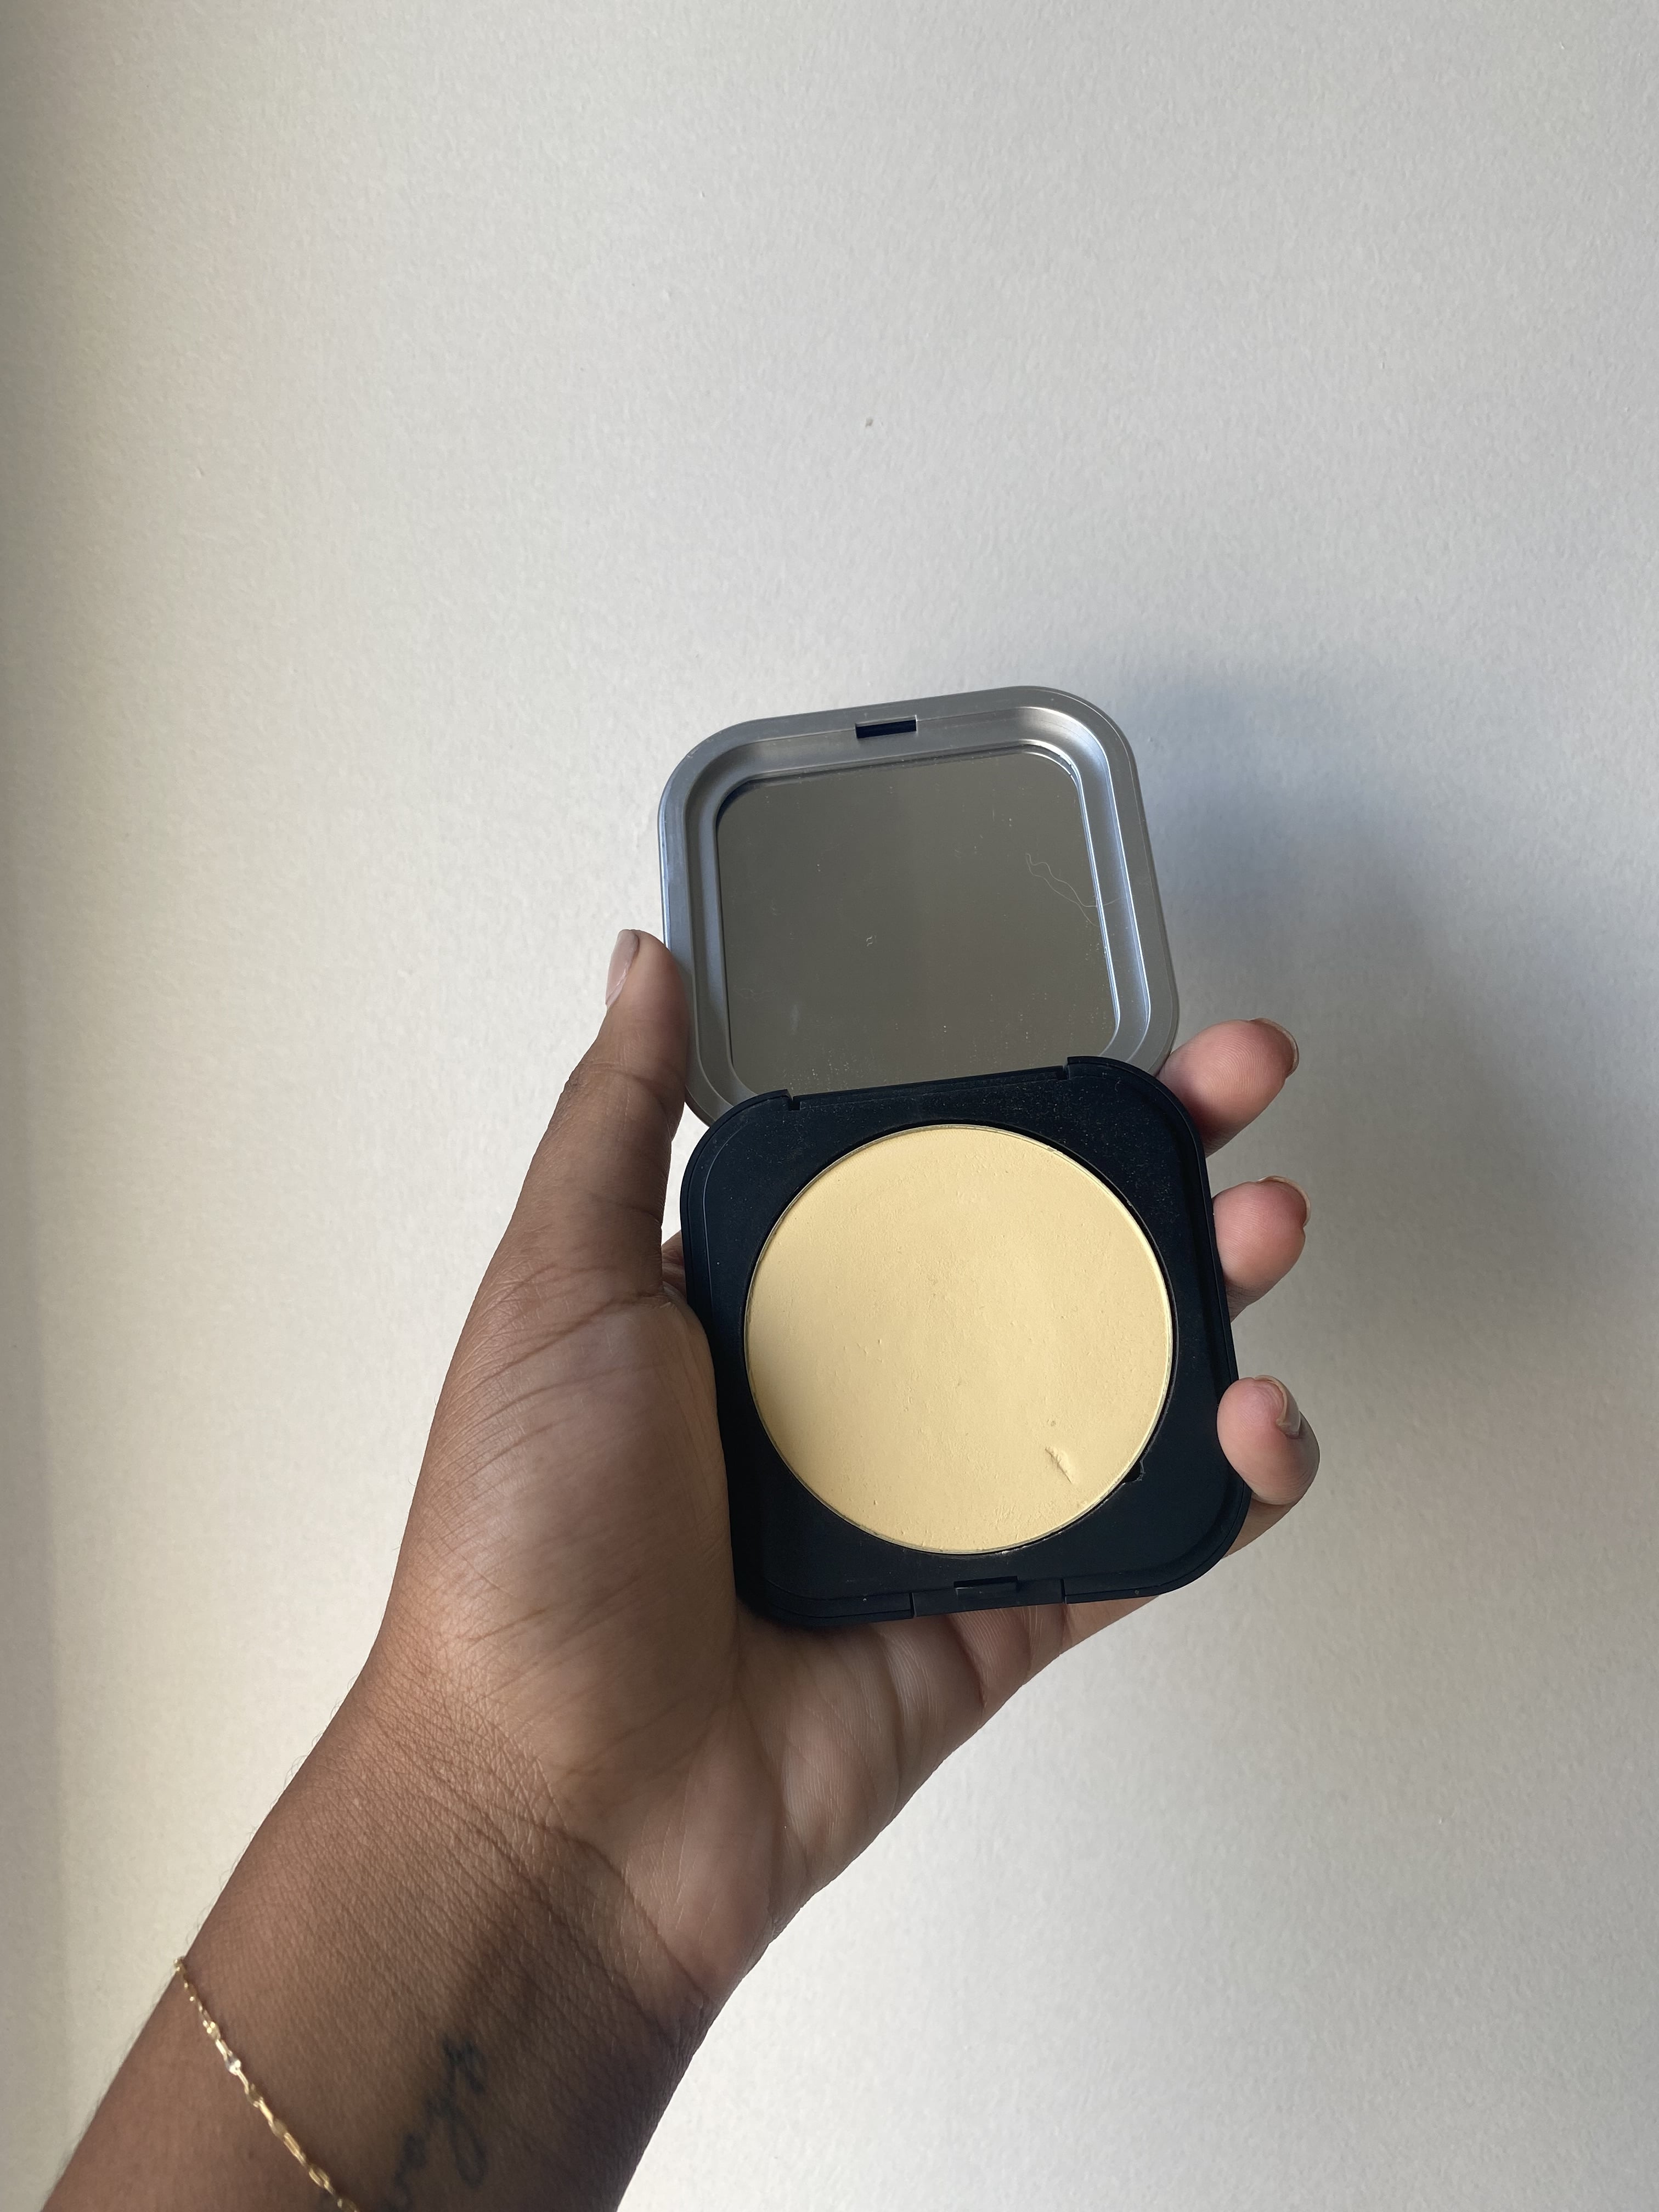 Make Up For Ever Ultra HD Microfinishing Pressed Powder-01 Translucent  (Makeup,Face,Powder)